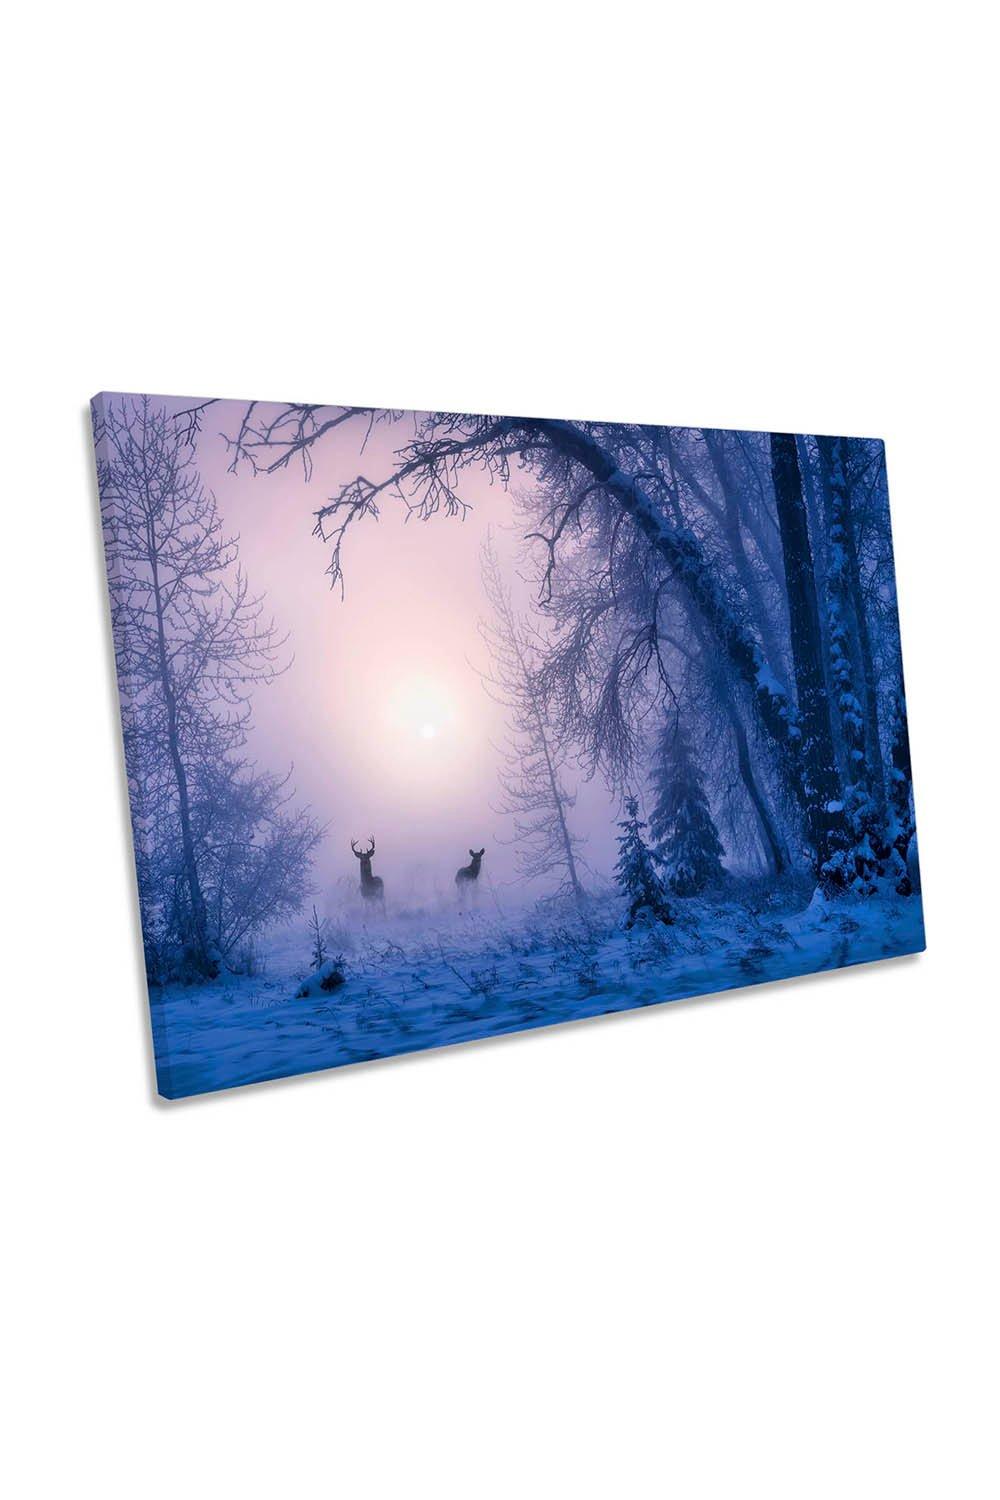 Deers in the Snowy Morning Fog Canvas Wall Art Picture Print